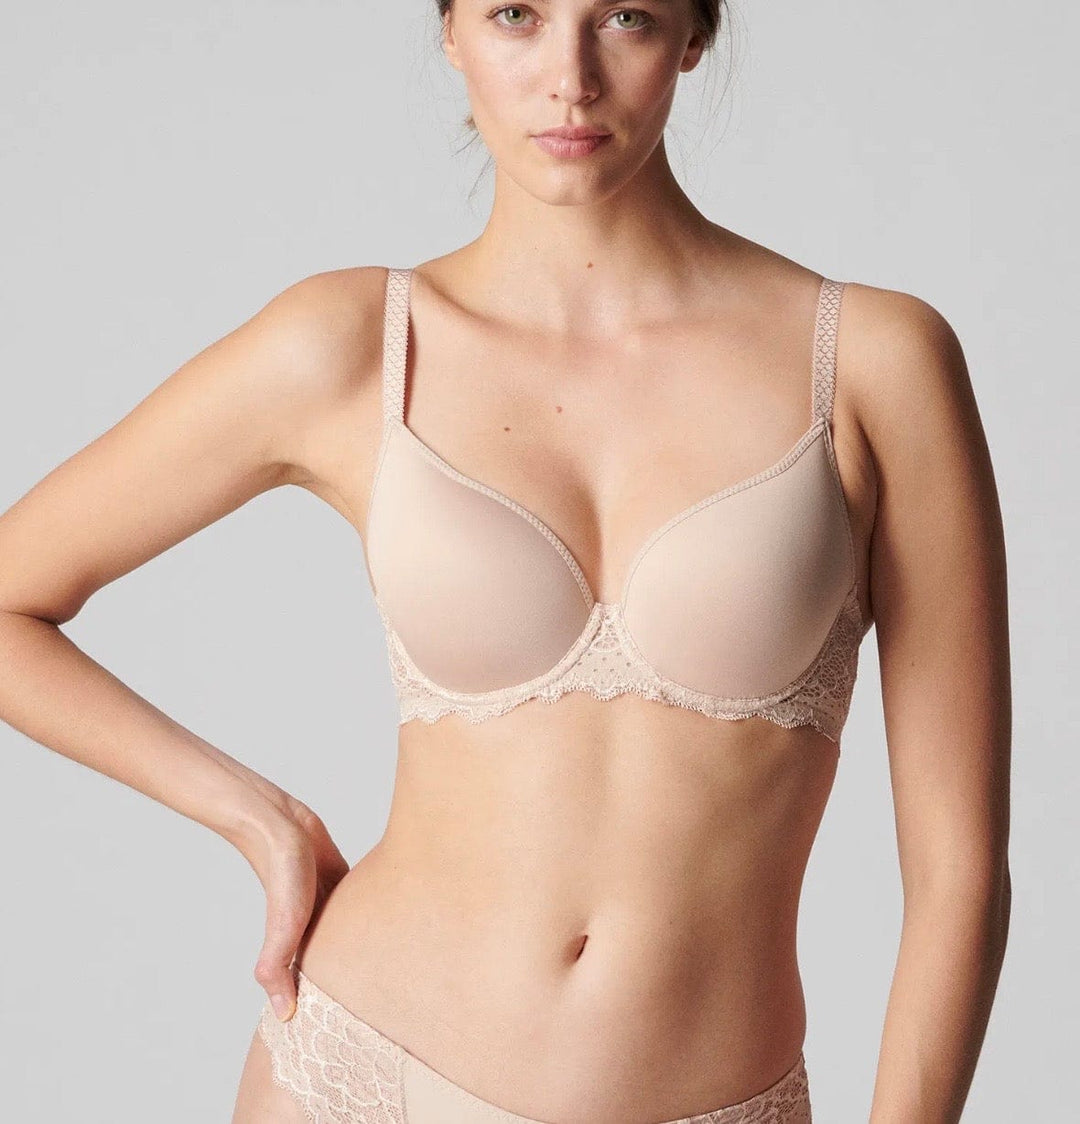 Simone Pérèle - SHOP NOW! Buy 2 or more bras and receive 20% off